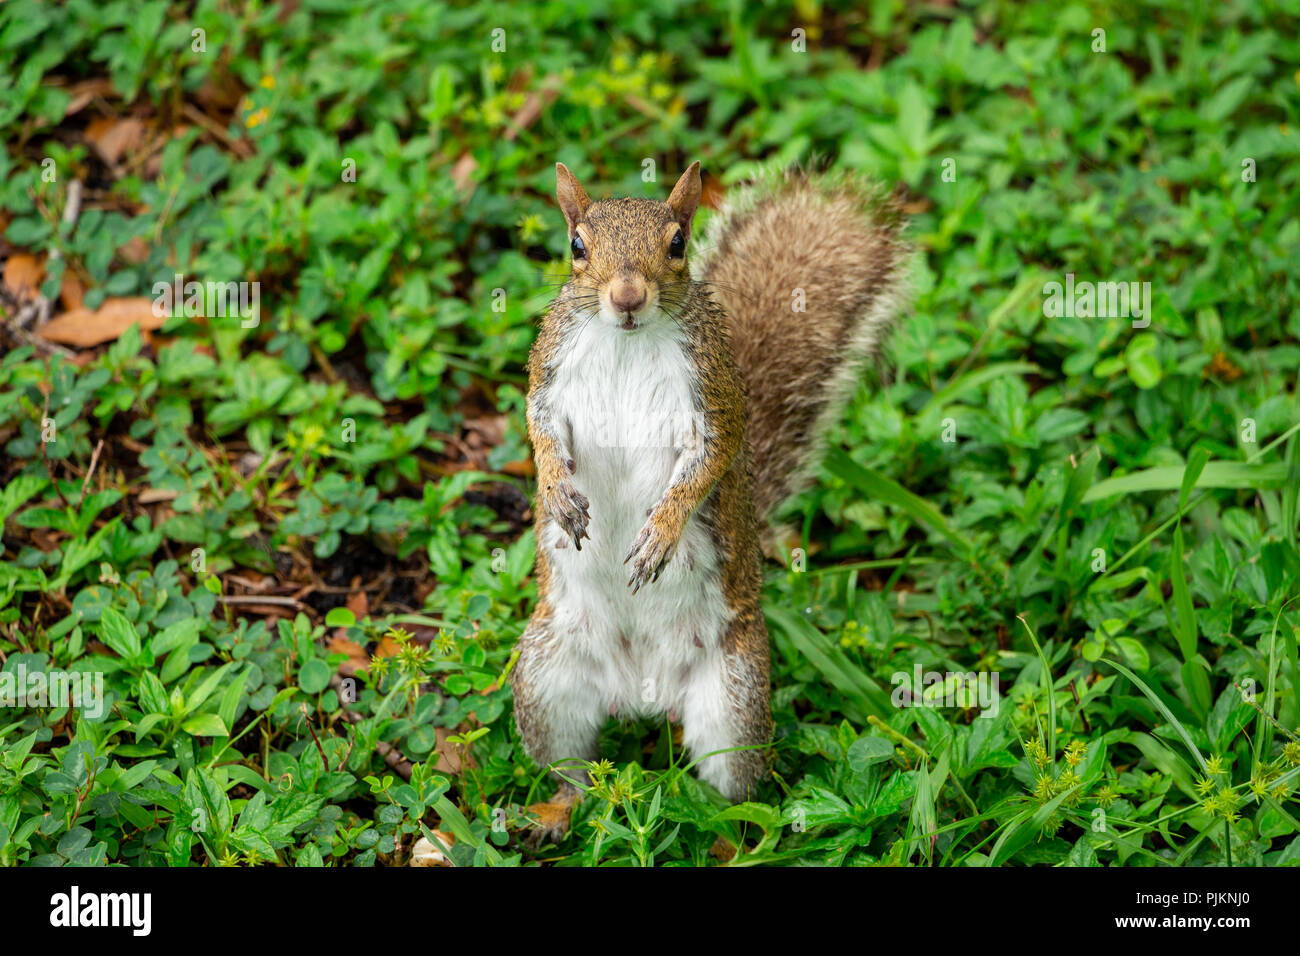 Eastern gray squirrel (Sciurus carolinensis) standing up on hind legs on grass - Topeekeegee Yugnee (TY) Park, Hollywood, Florida, USA Stock Photo